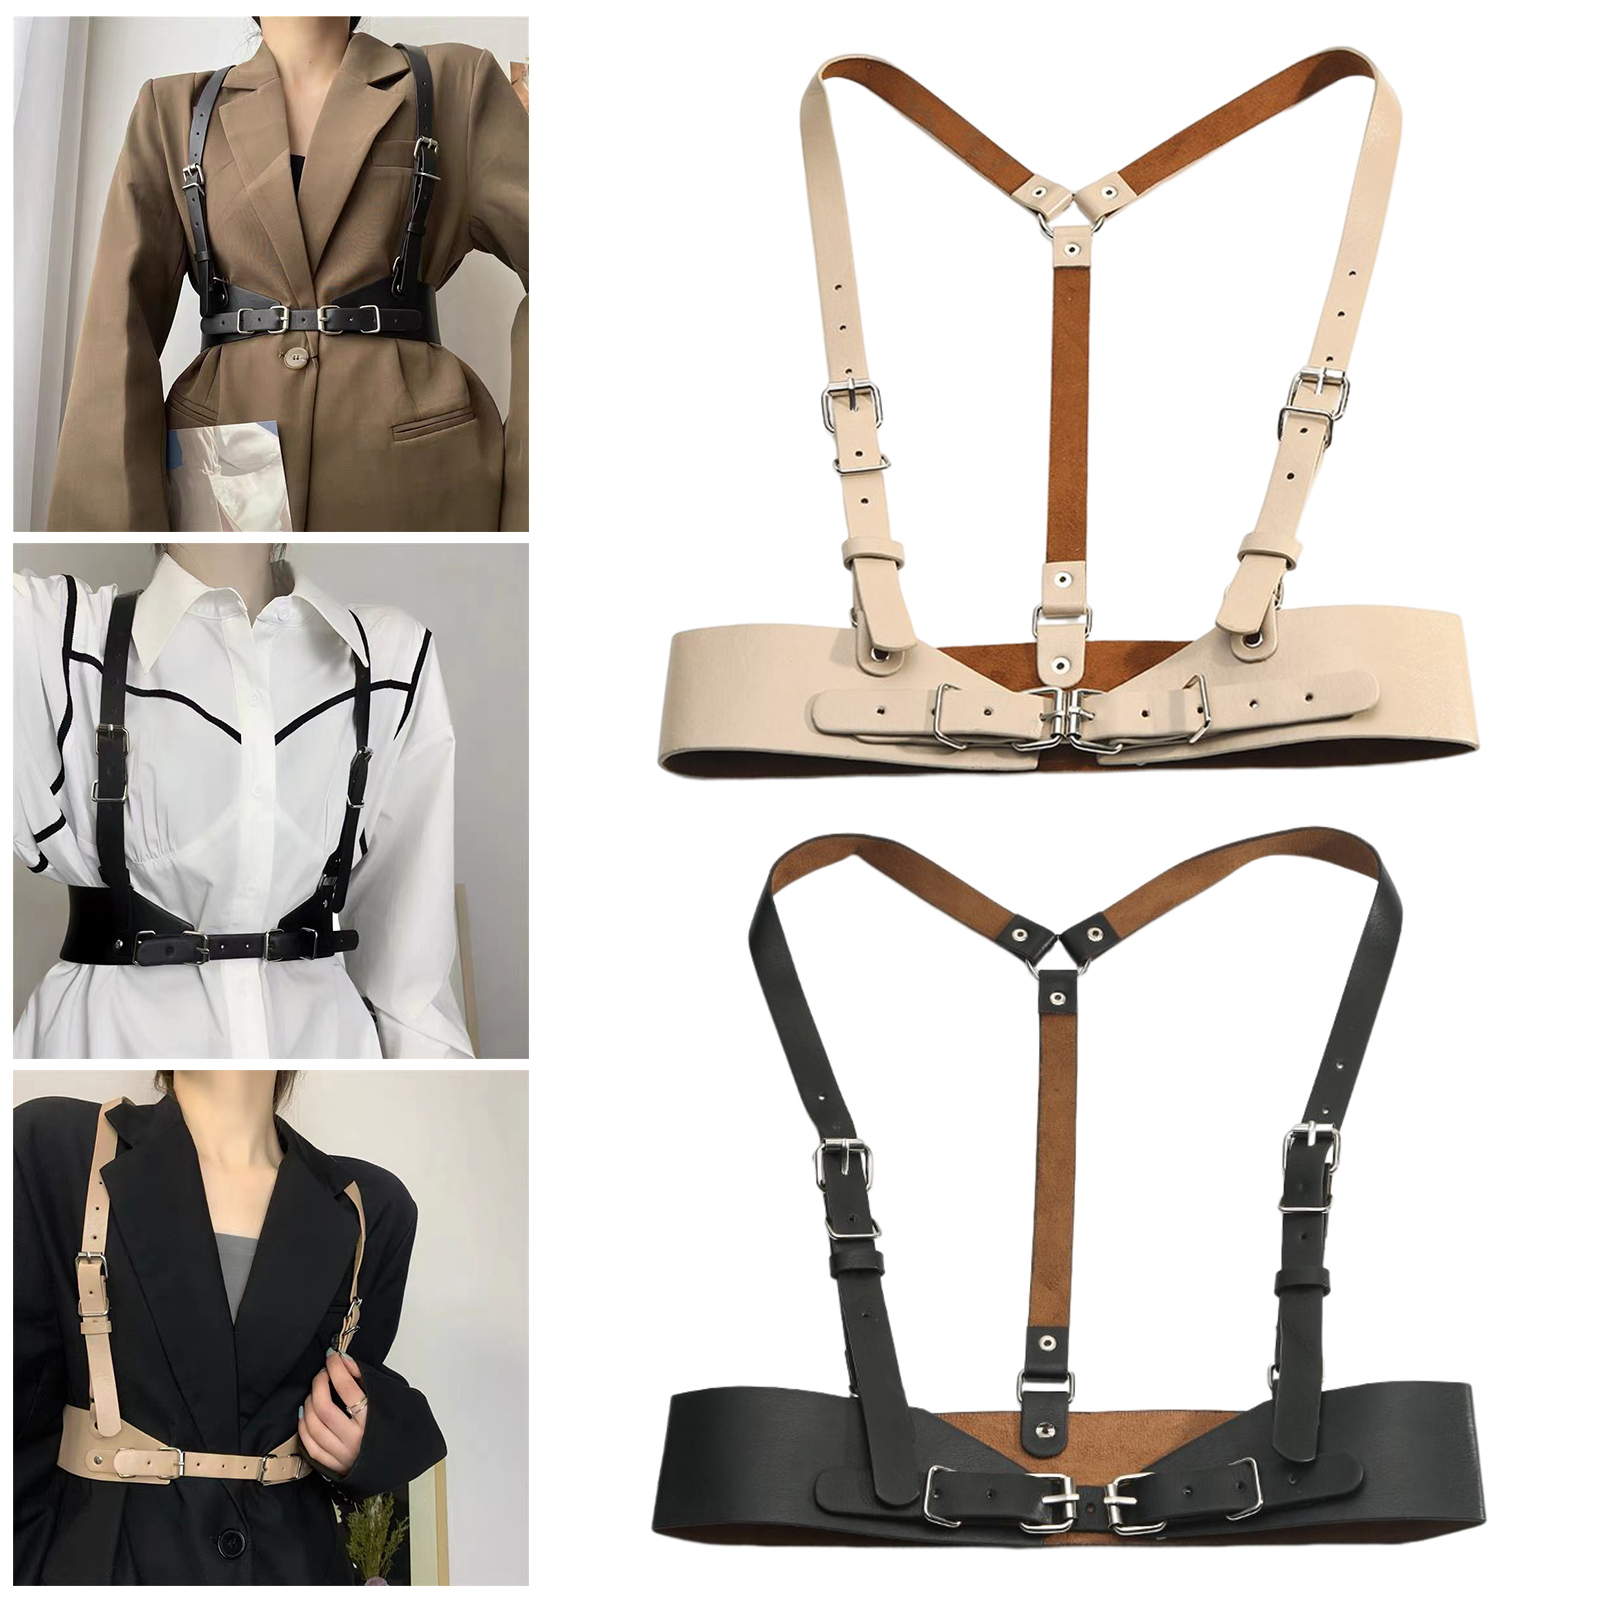 Hesroicy Women Cincher Adjustable Punk Style Pin Buckle Double Straps  Elastic Decorate Fashion Accessories Sexy Faux Leather Body Harness Belt  for Daily Wear 